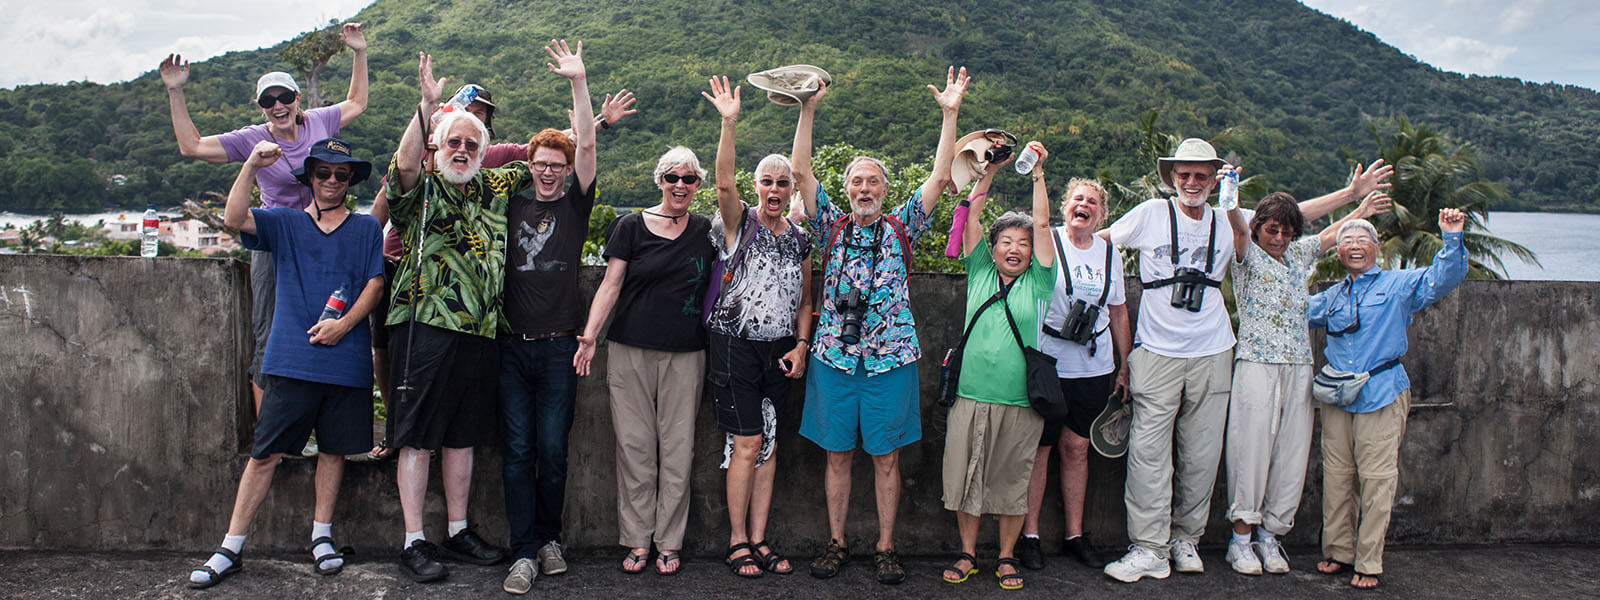 Group photo showing folks having fun on our snorkeling tour to Banda Islands